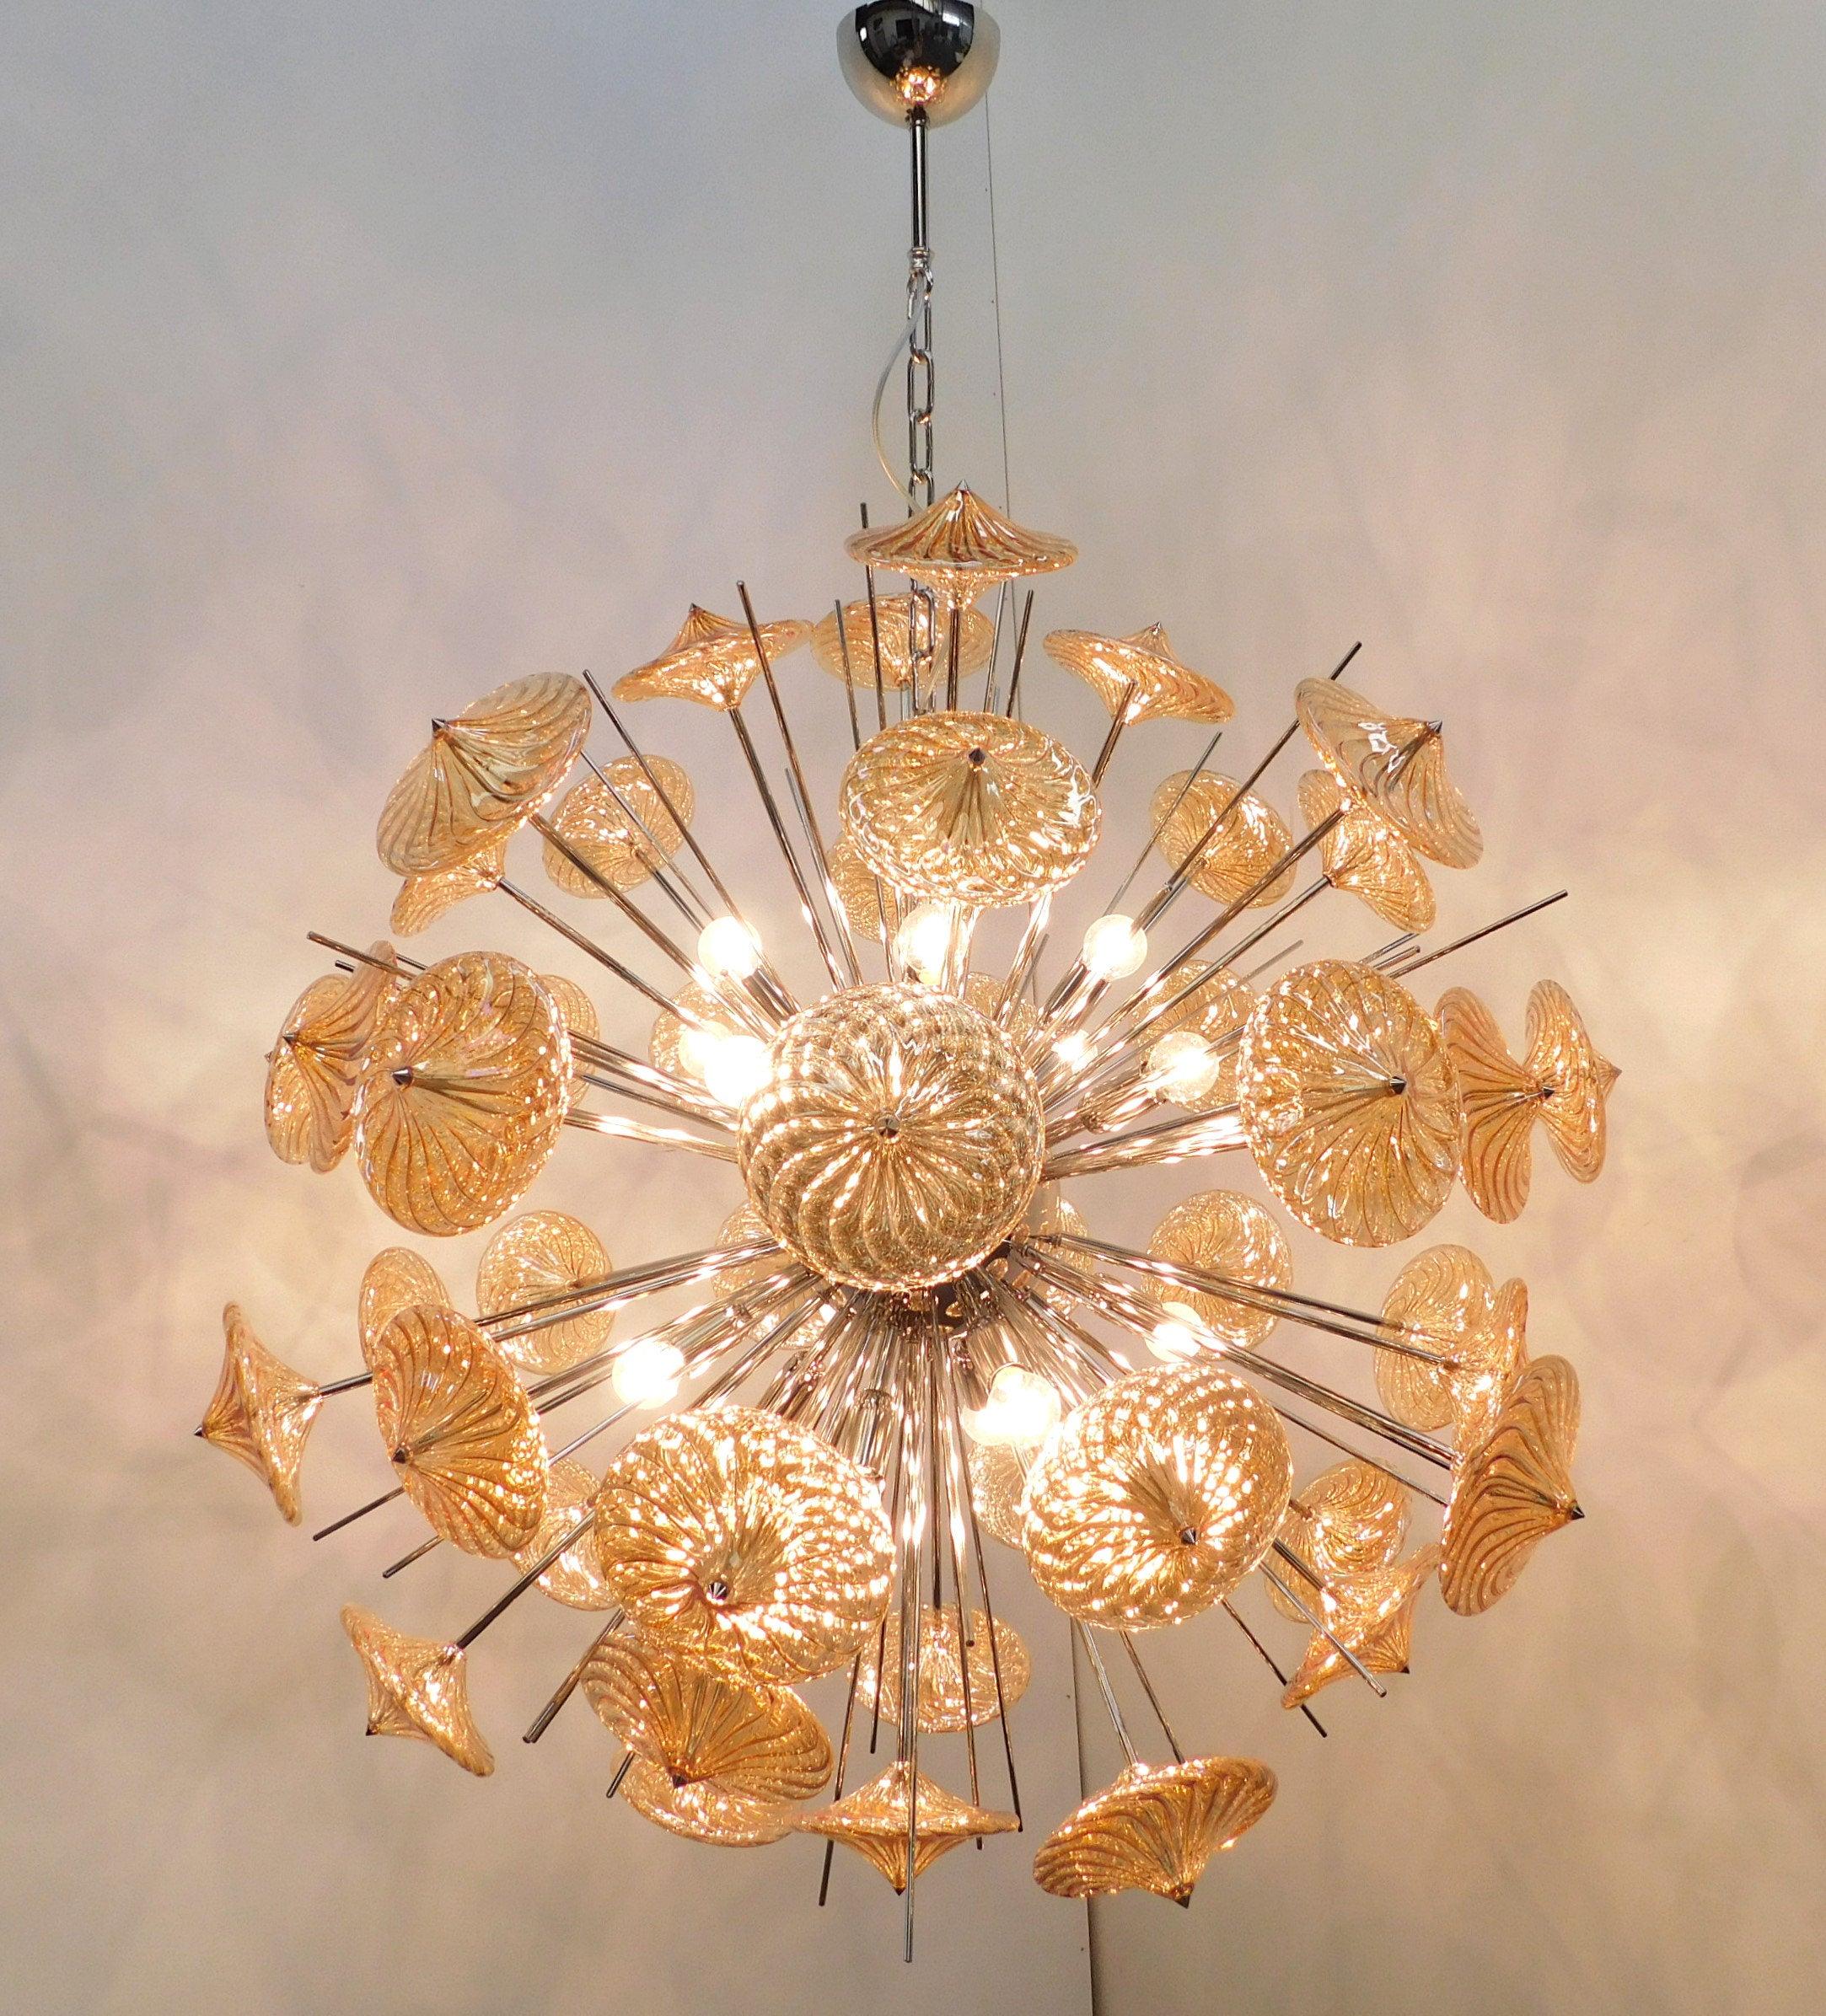 Italian modern Sputnik chandelier with amber Pyrex borosilicate glasses hand blown to produce a spiraled effect, mounted on polished nickel frame / Designed by Fabio Bergomi for Fabio Ltd / Made in Italy
16-light / E26 or E27 type / max 60W